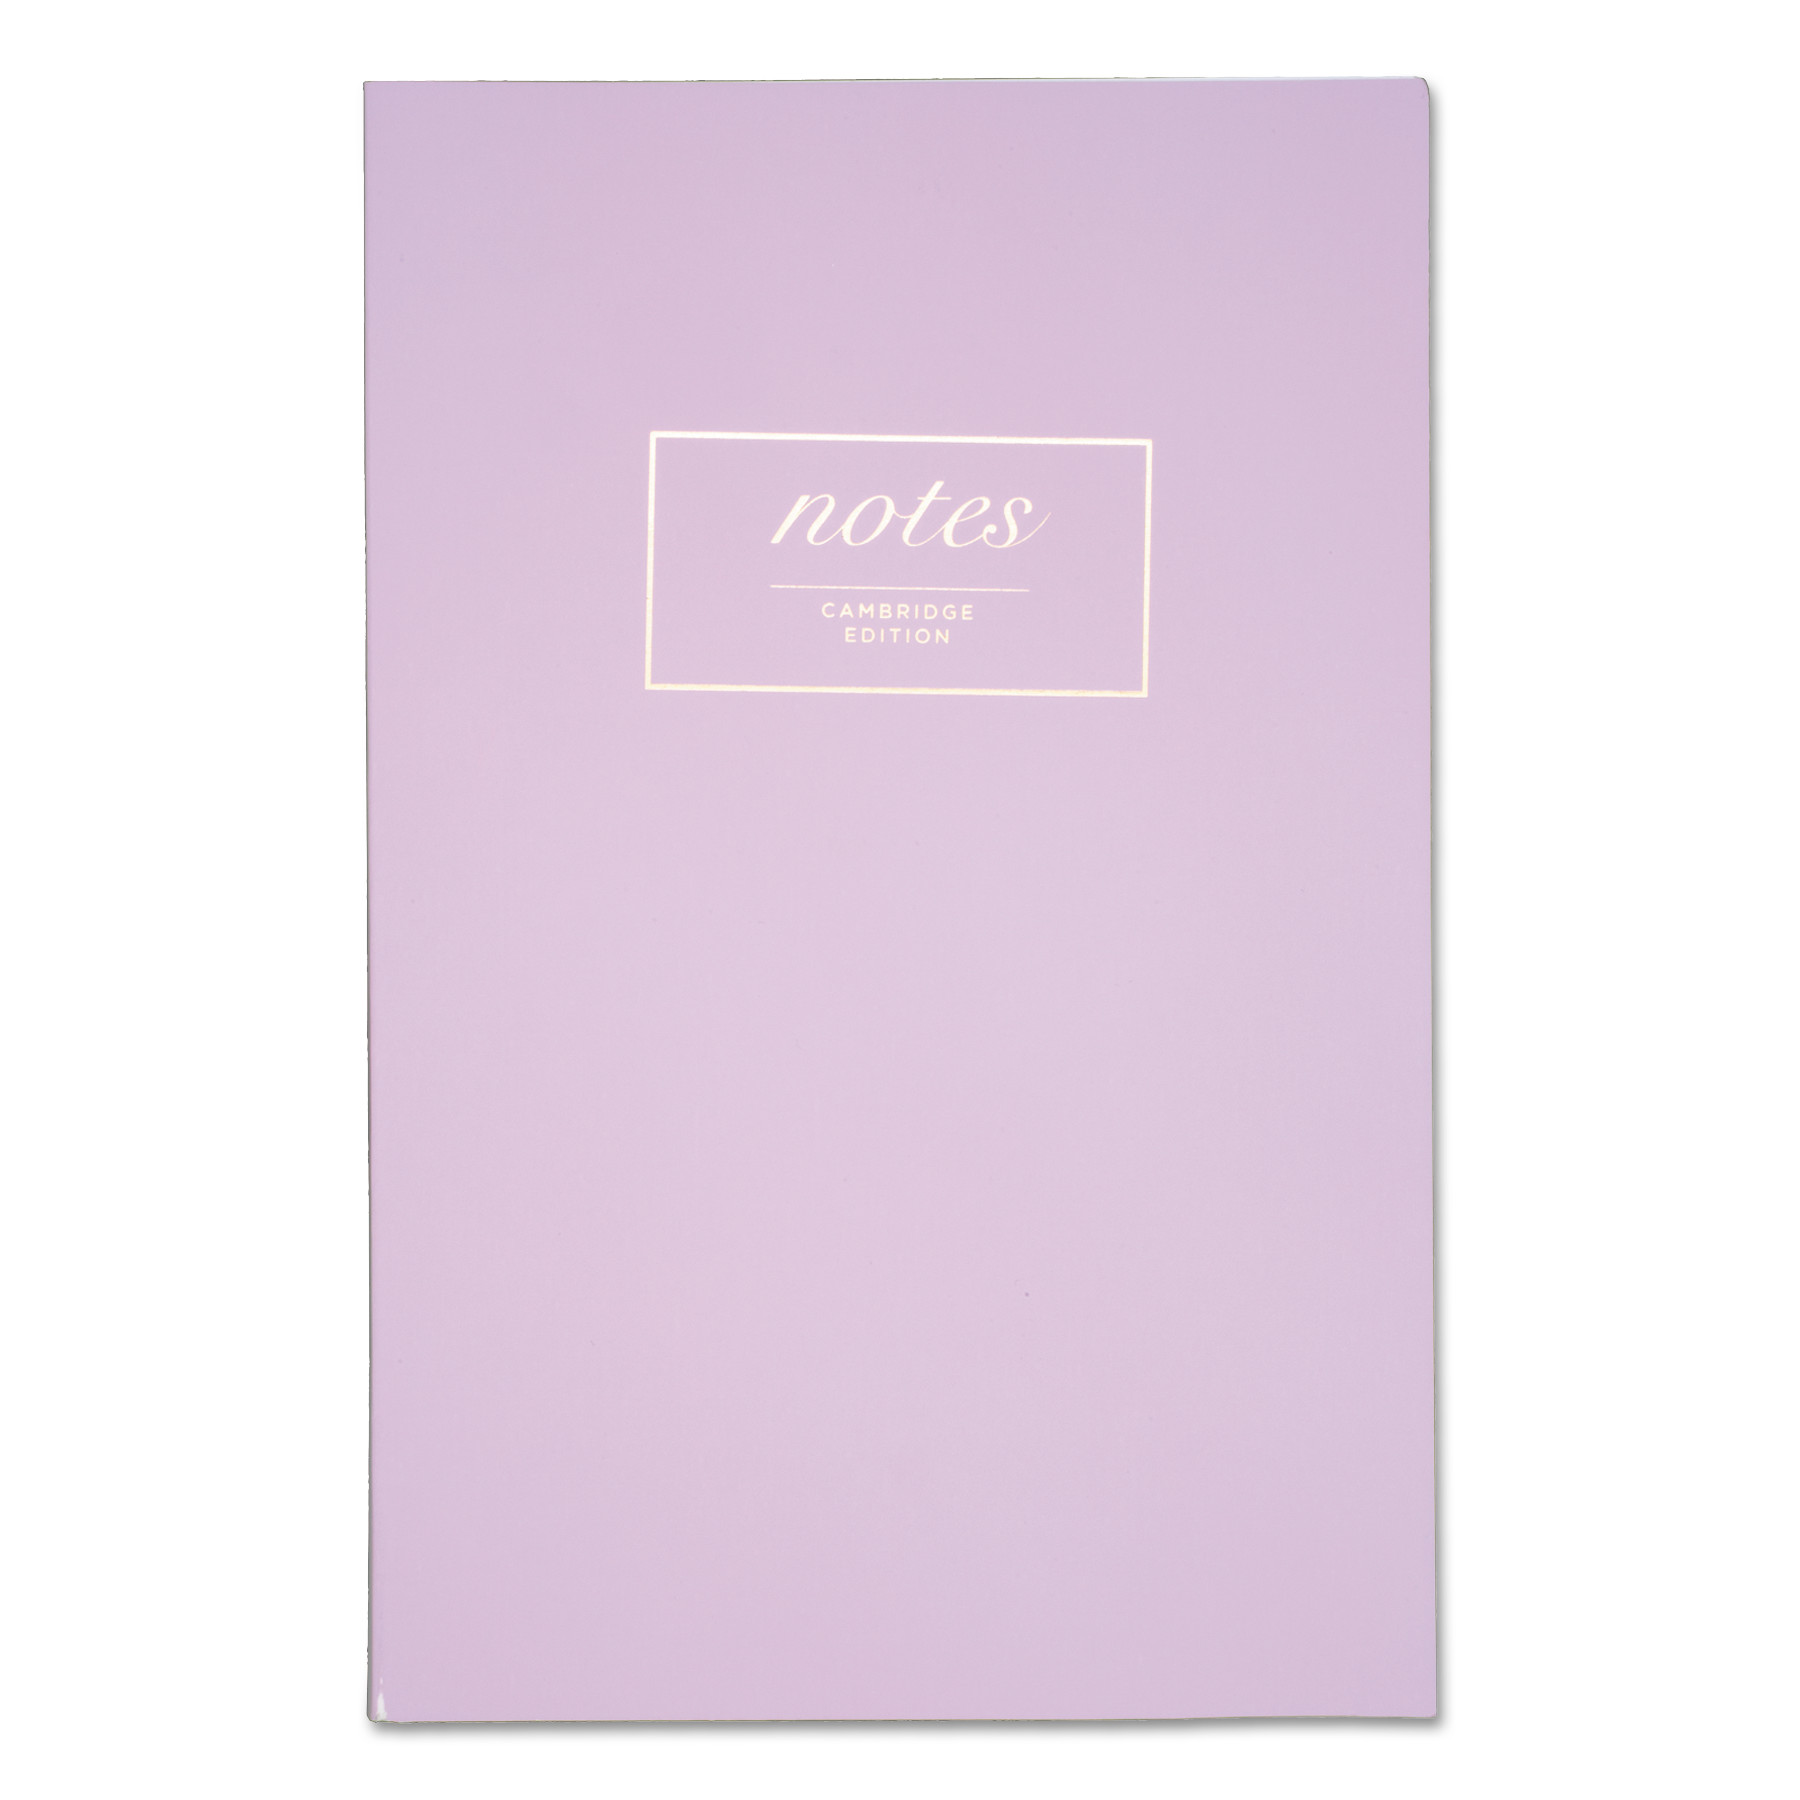 Workstyle Notebook, 1 Subject, Wide/Legal Rule, Lavender Cover, 8.5 x 5.5, 80 Pages